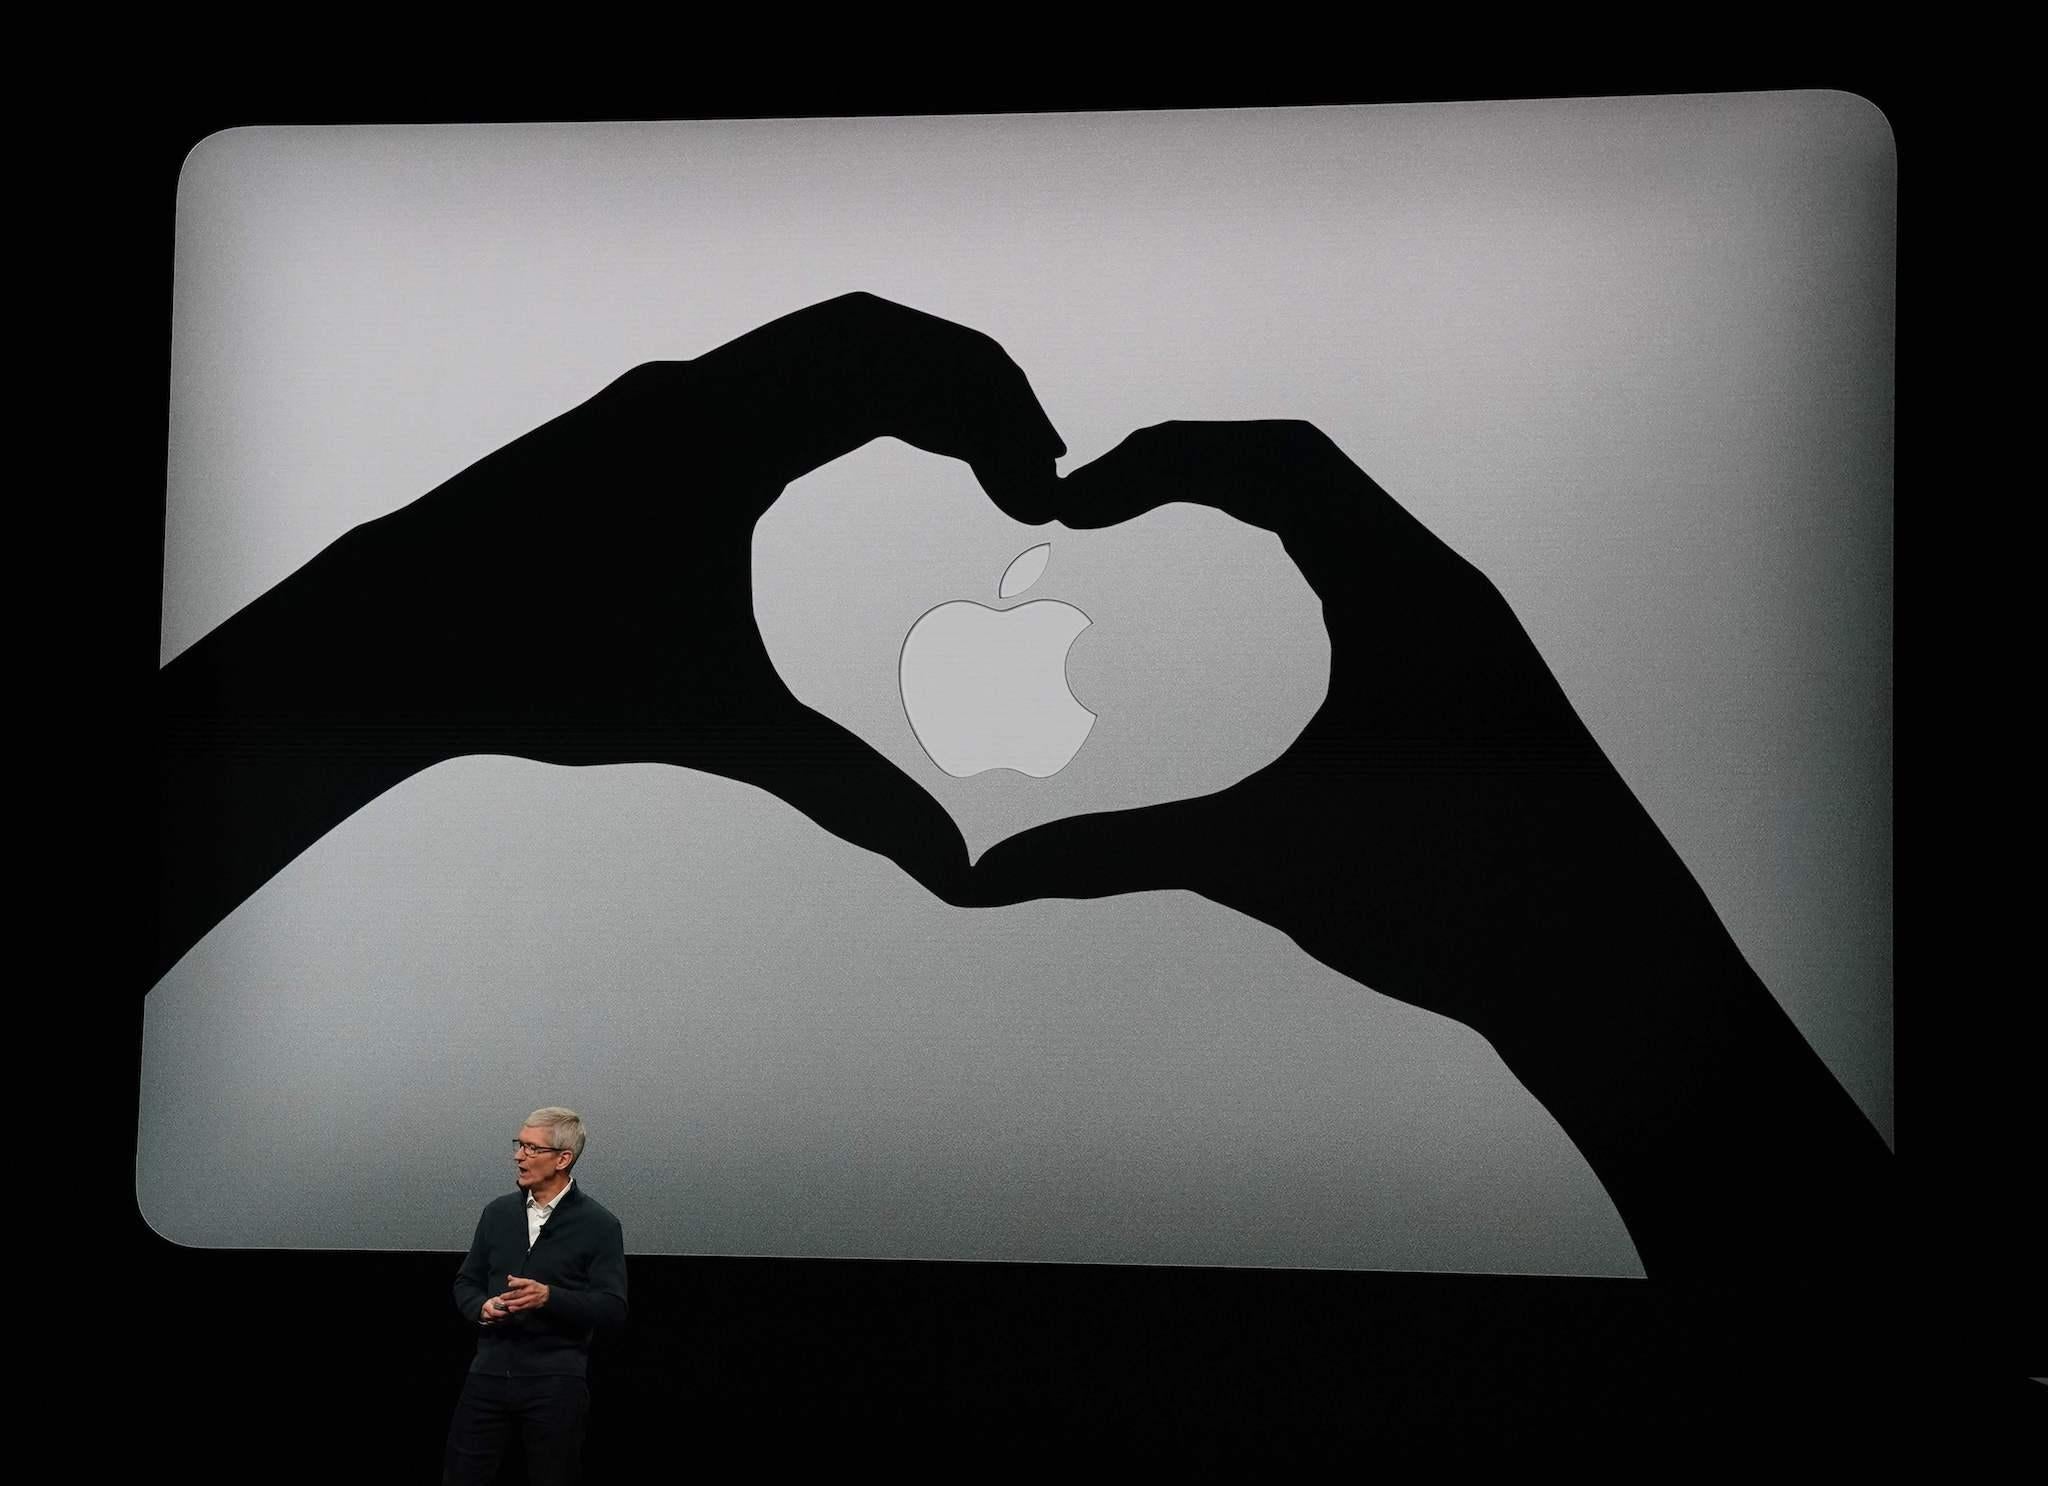 Apple CEO Tim Cook presents new products, including new Macbook laptops, during a special event at the Brooklyn Academy of Music in New York